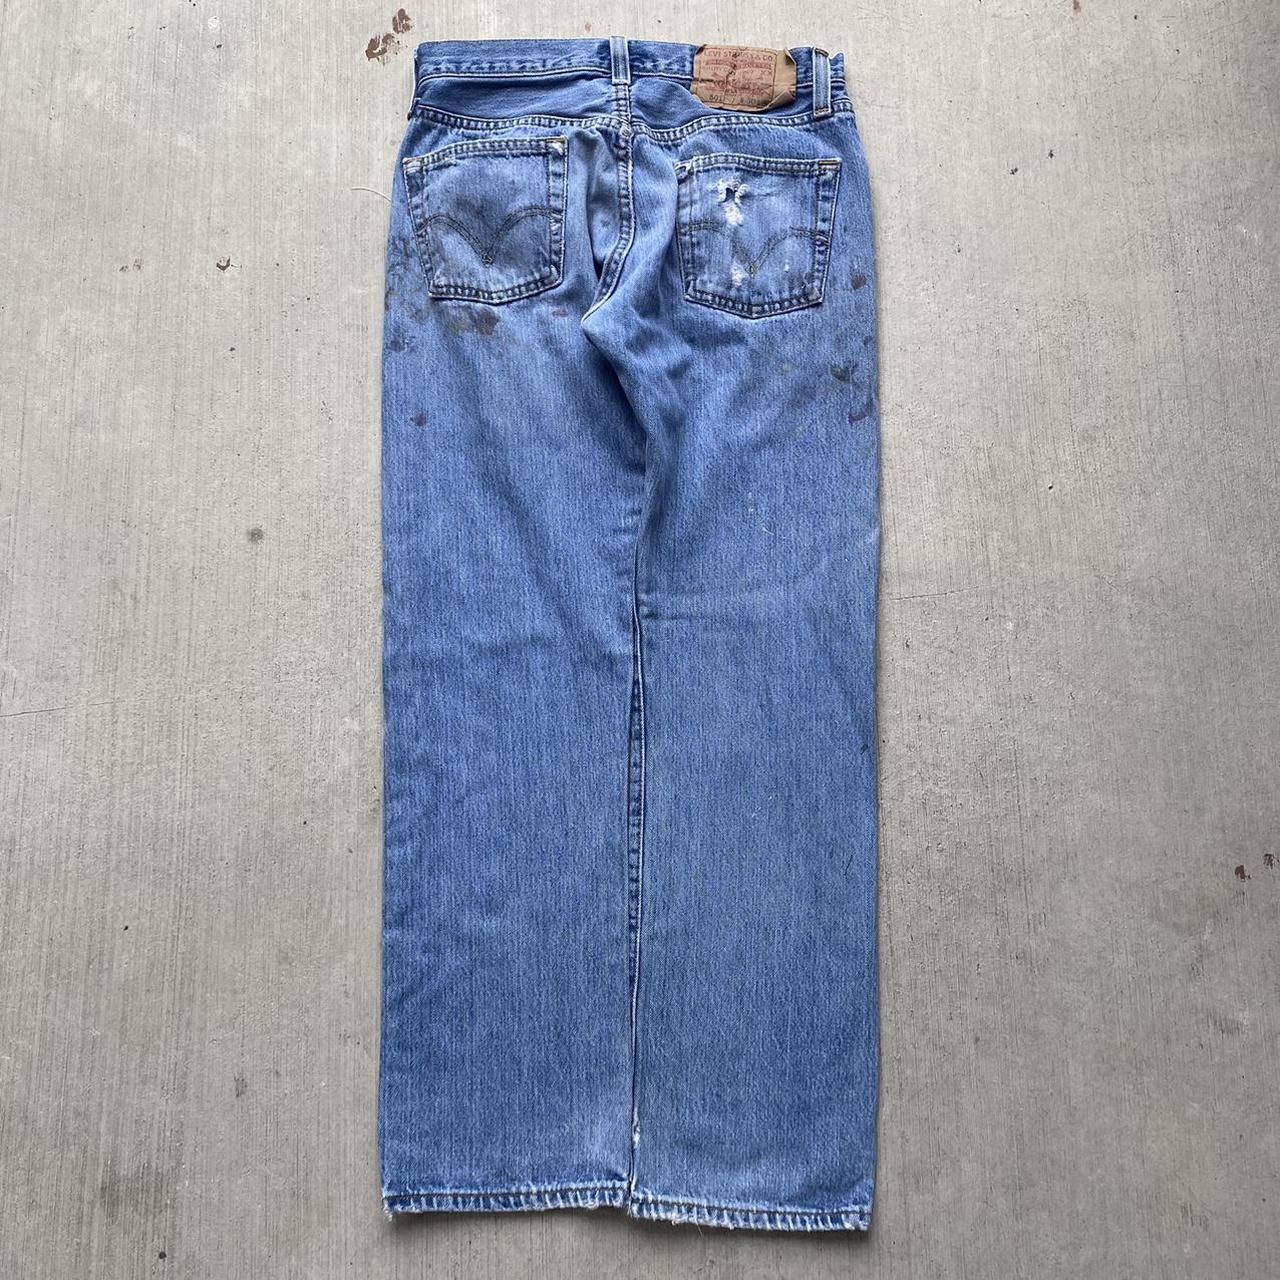 Levi’s 501 jeans 30x28.5 | Ripped jeans, hole in the... - Depop